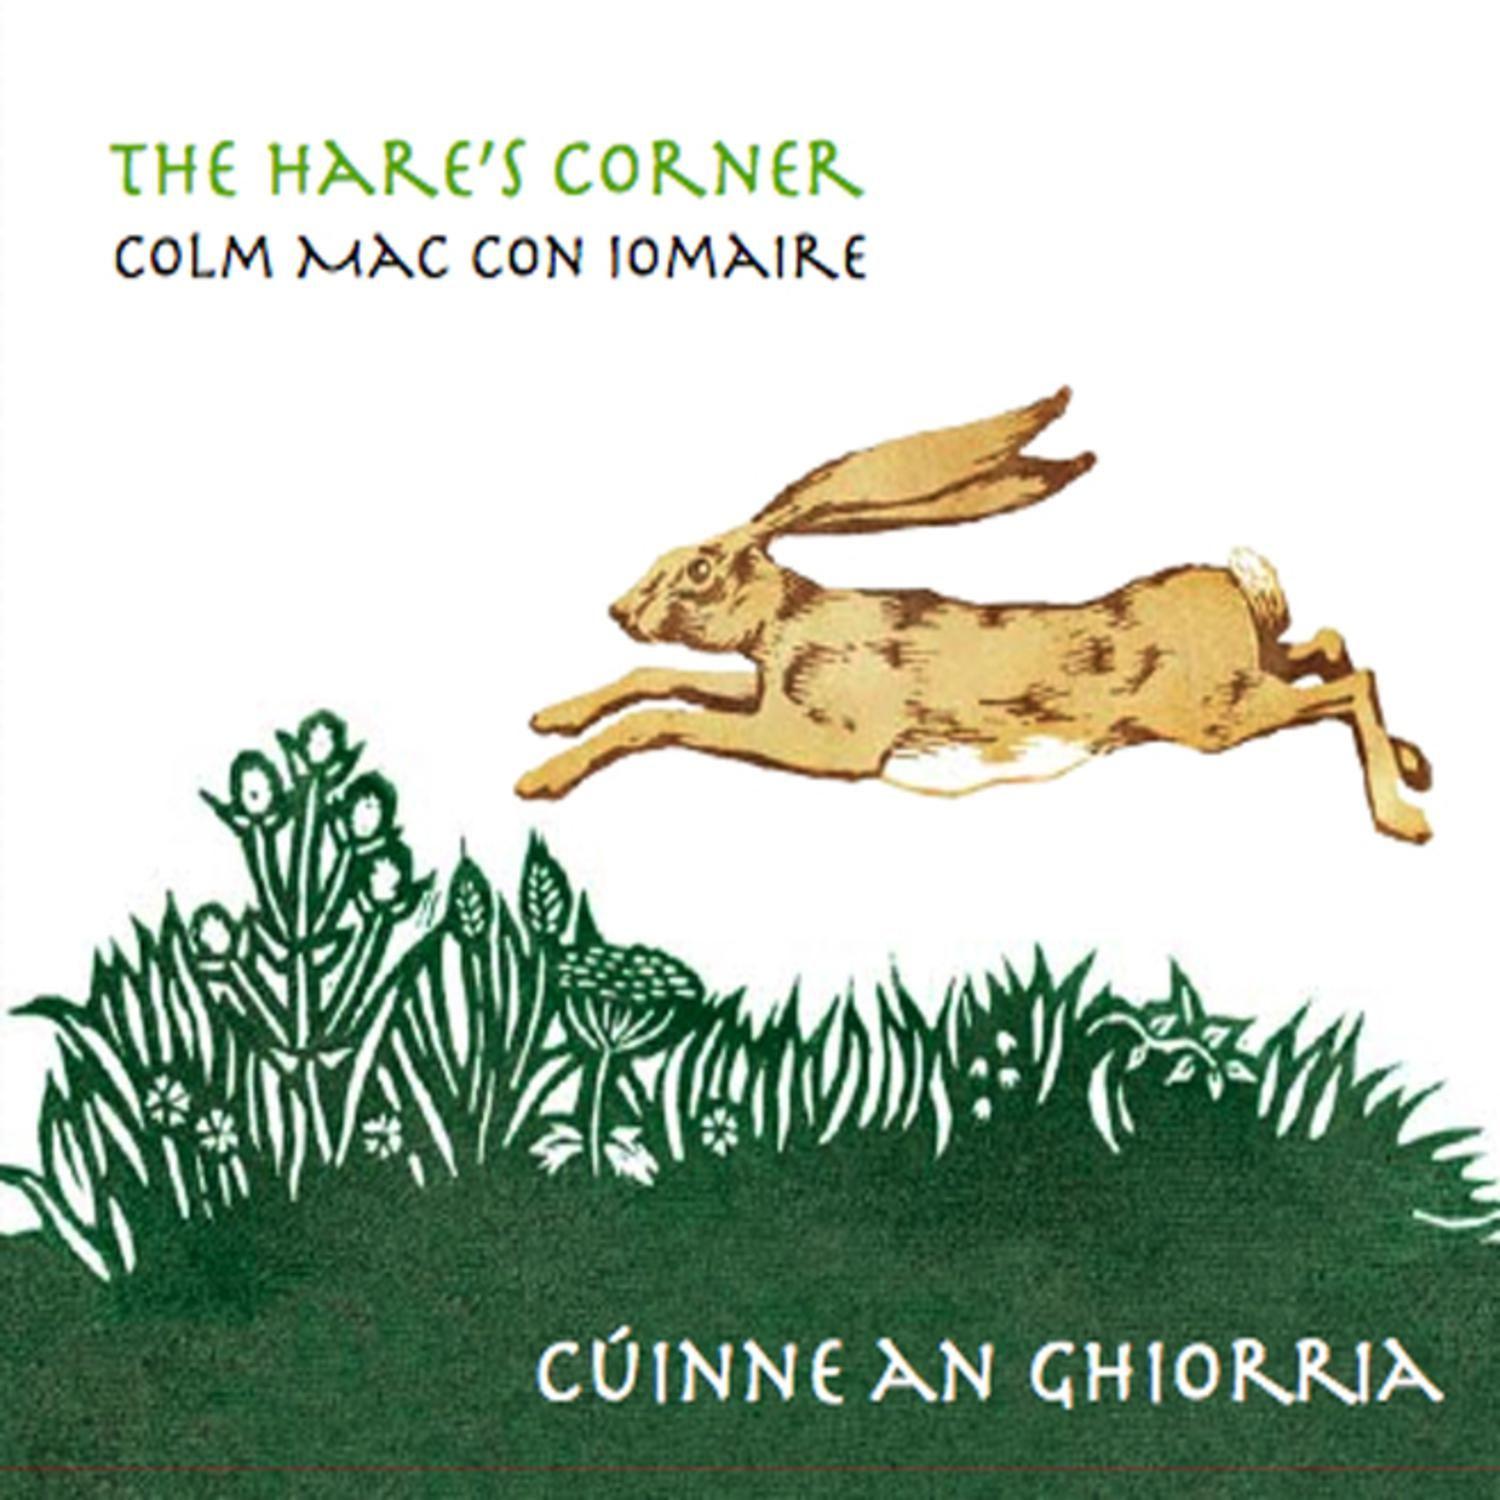 Colm Mac Con Iomaire - The Court Of New Town (Cuirt Bhaile Nua)